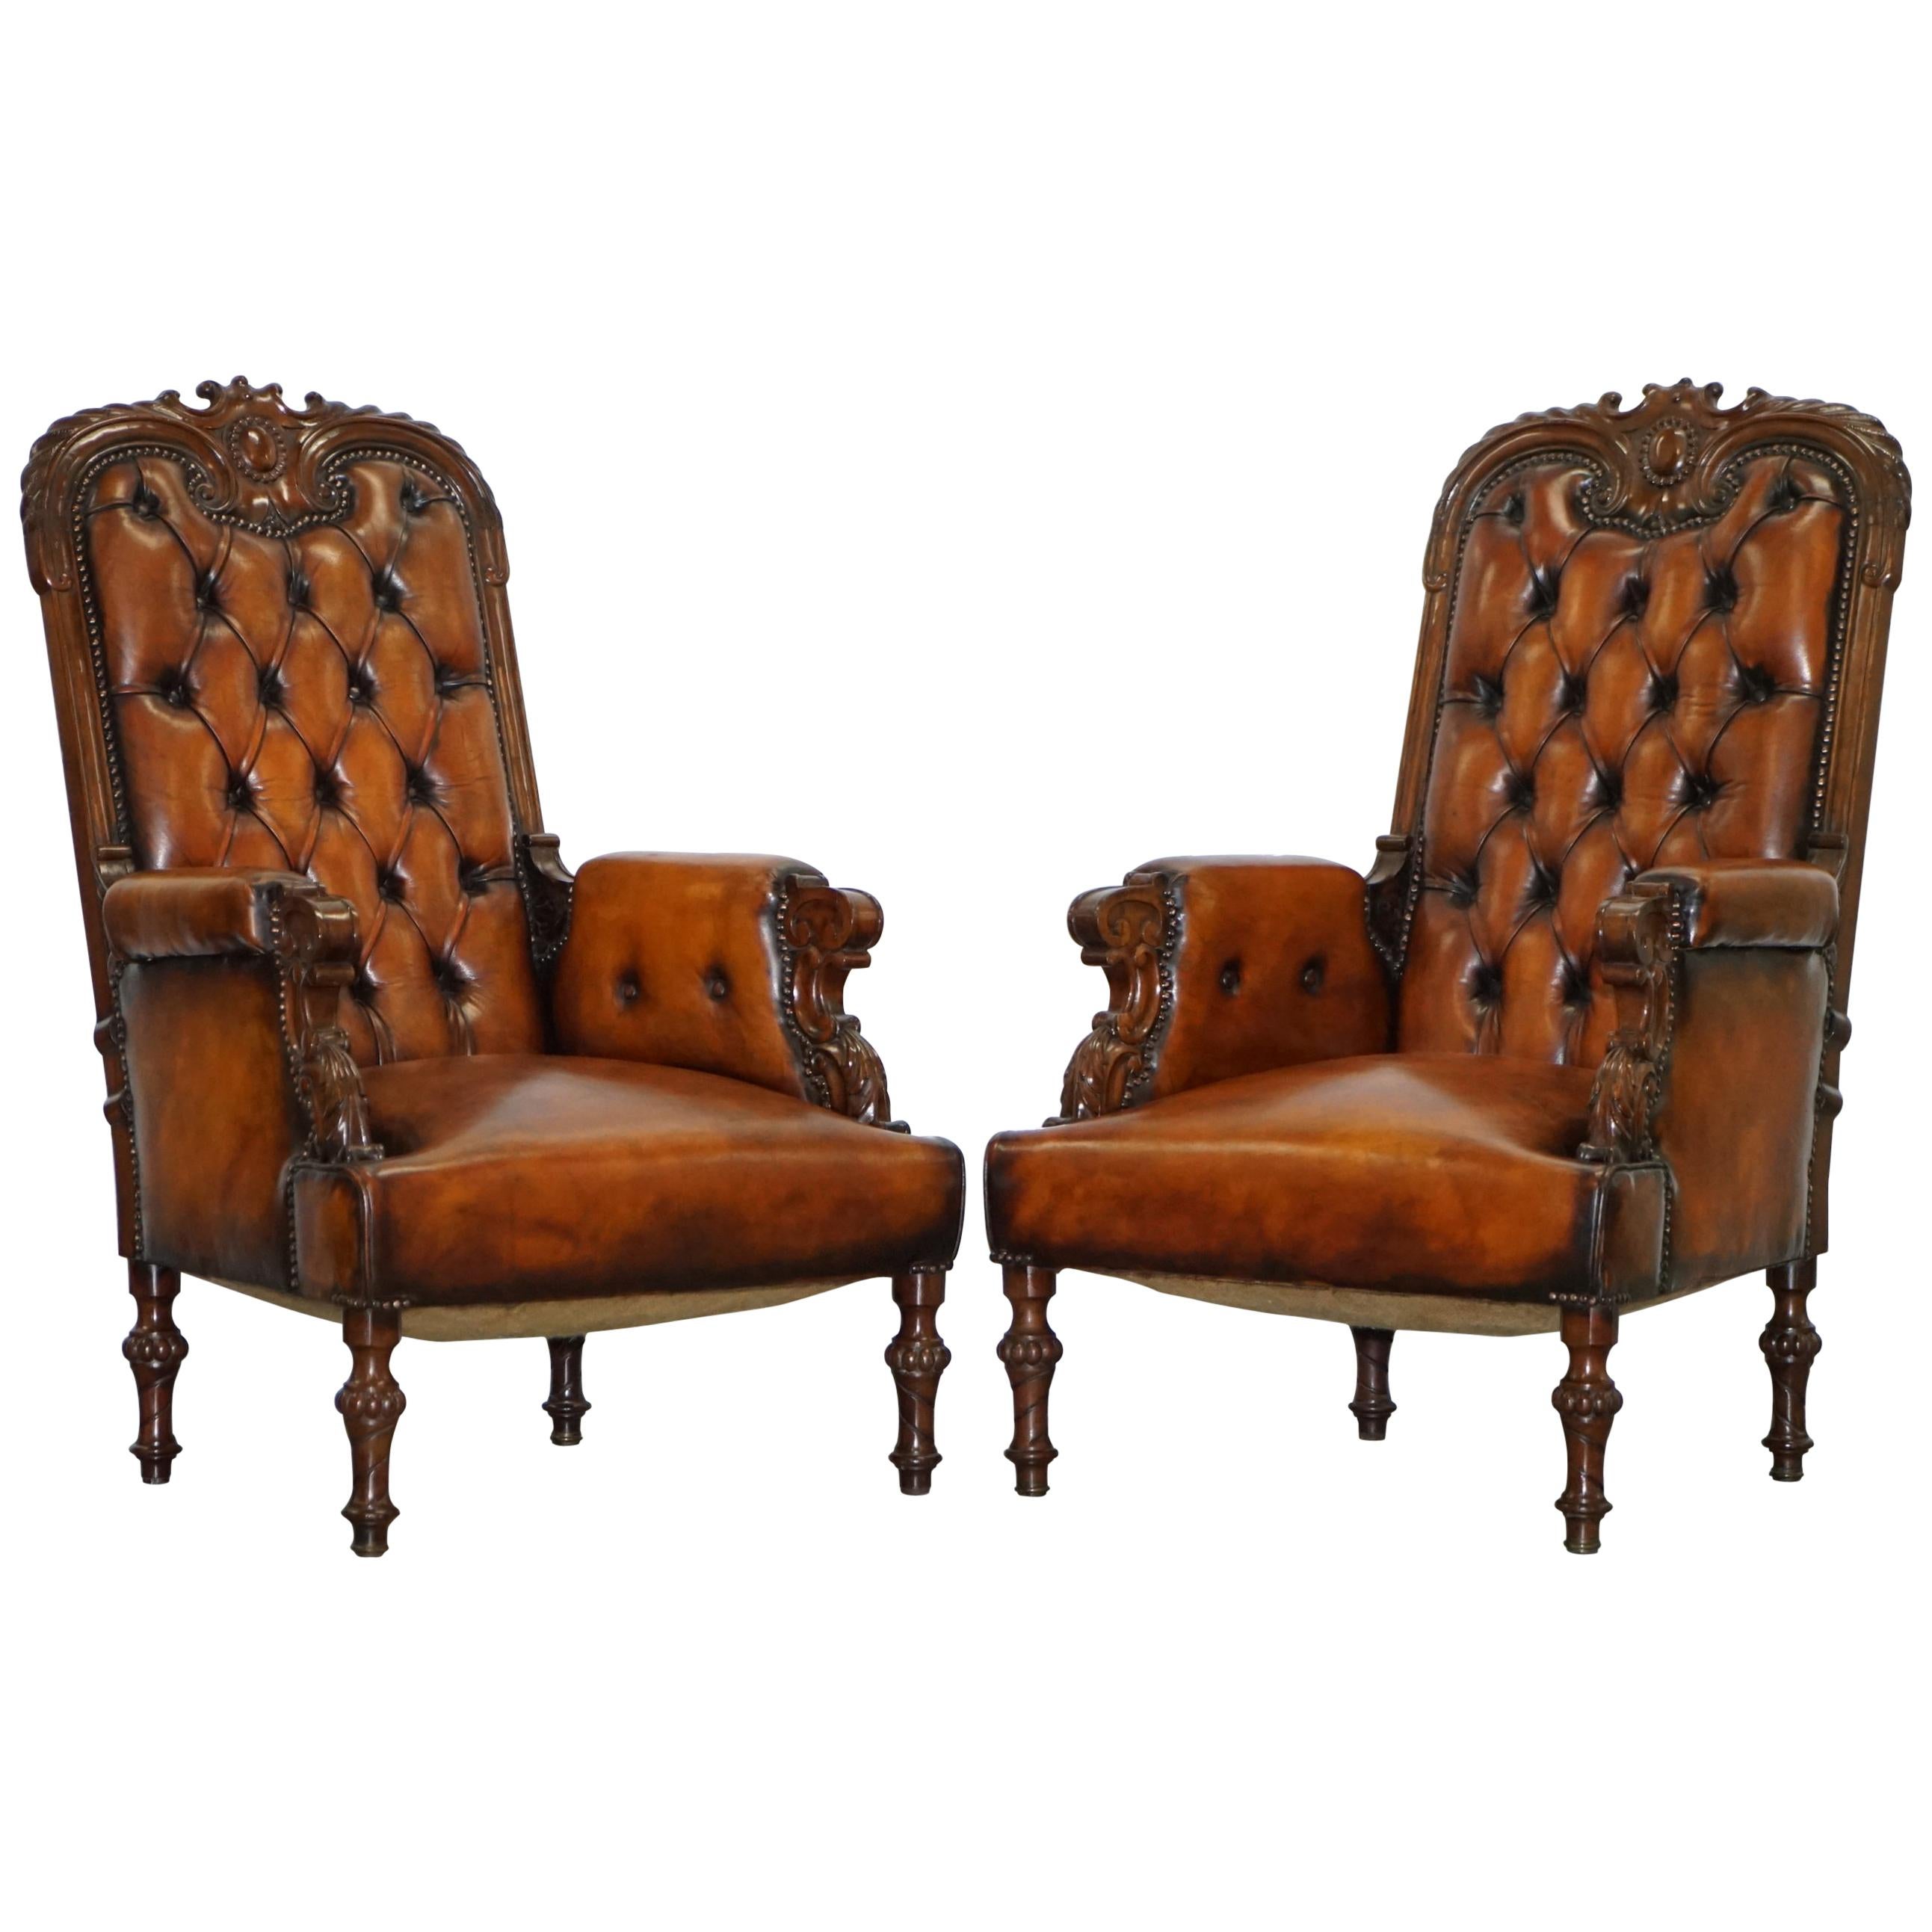 Pair of Fully Restored Show Wood Frame Chesterfield Leather Victorian Armchairs